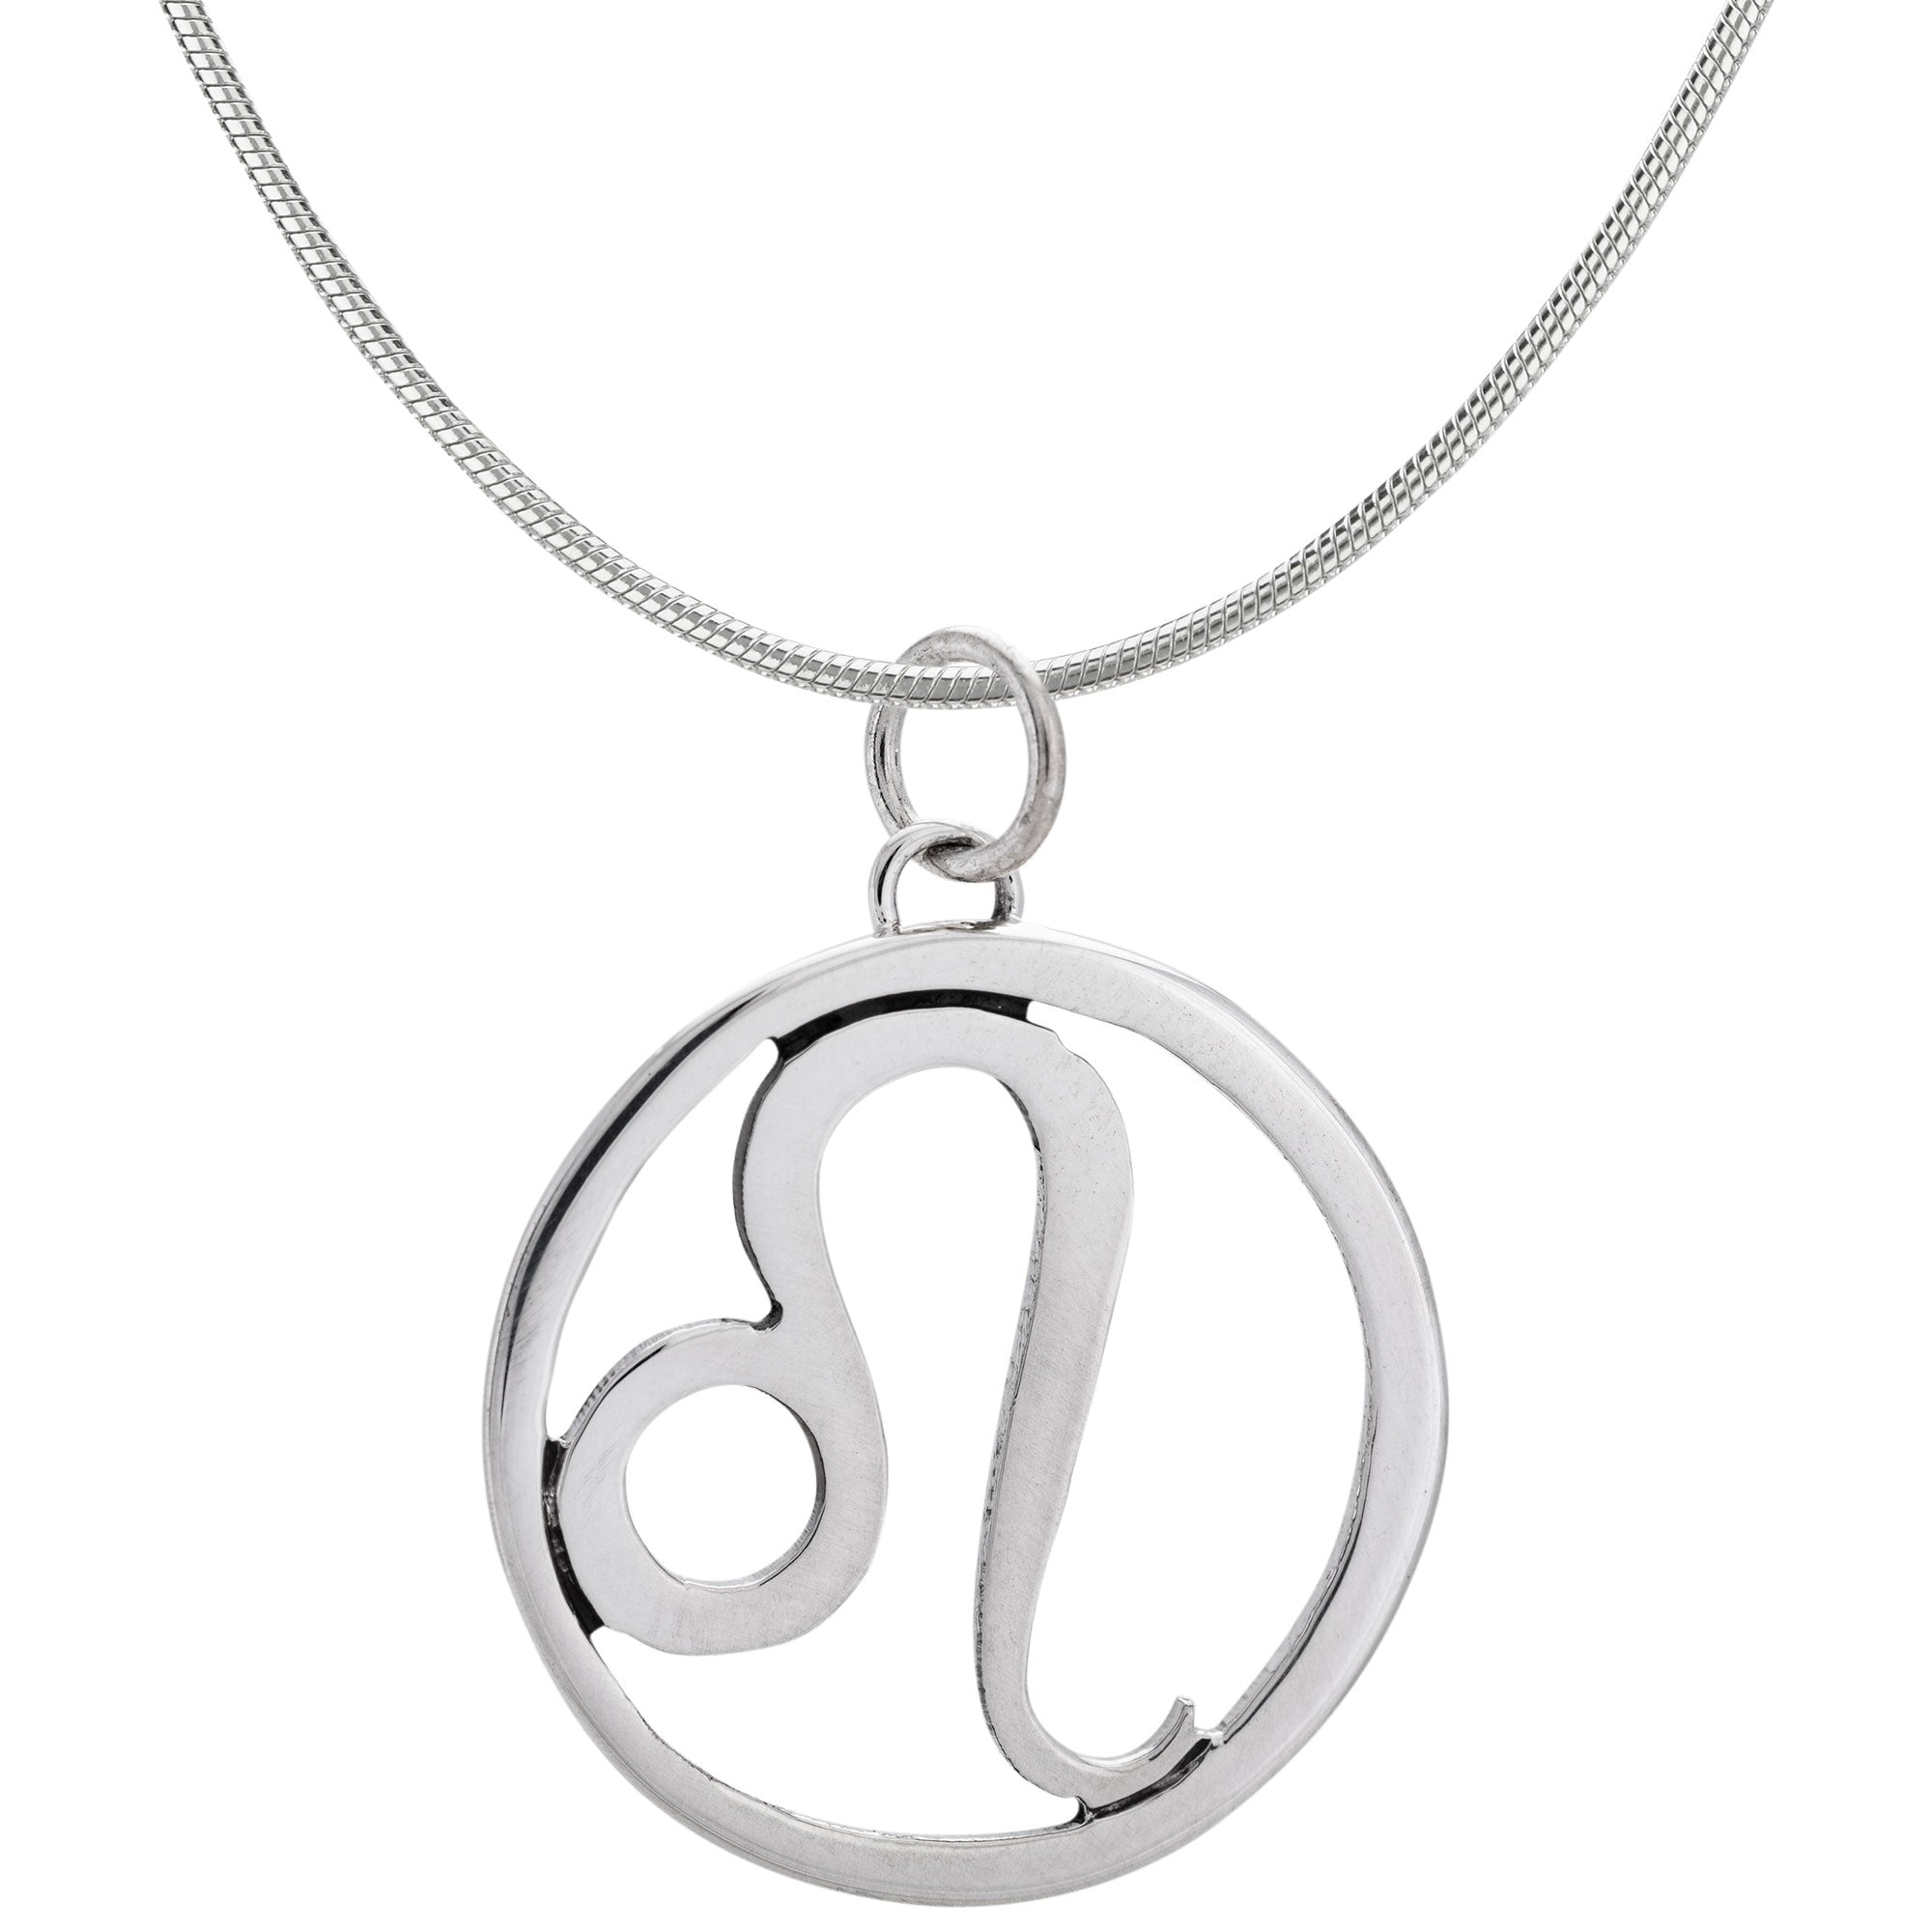 Zodiac Sign Astrology Necklace Collection - Leo - With Diamond Cut Chain